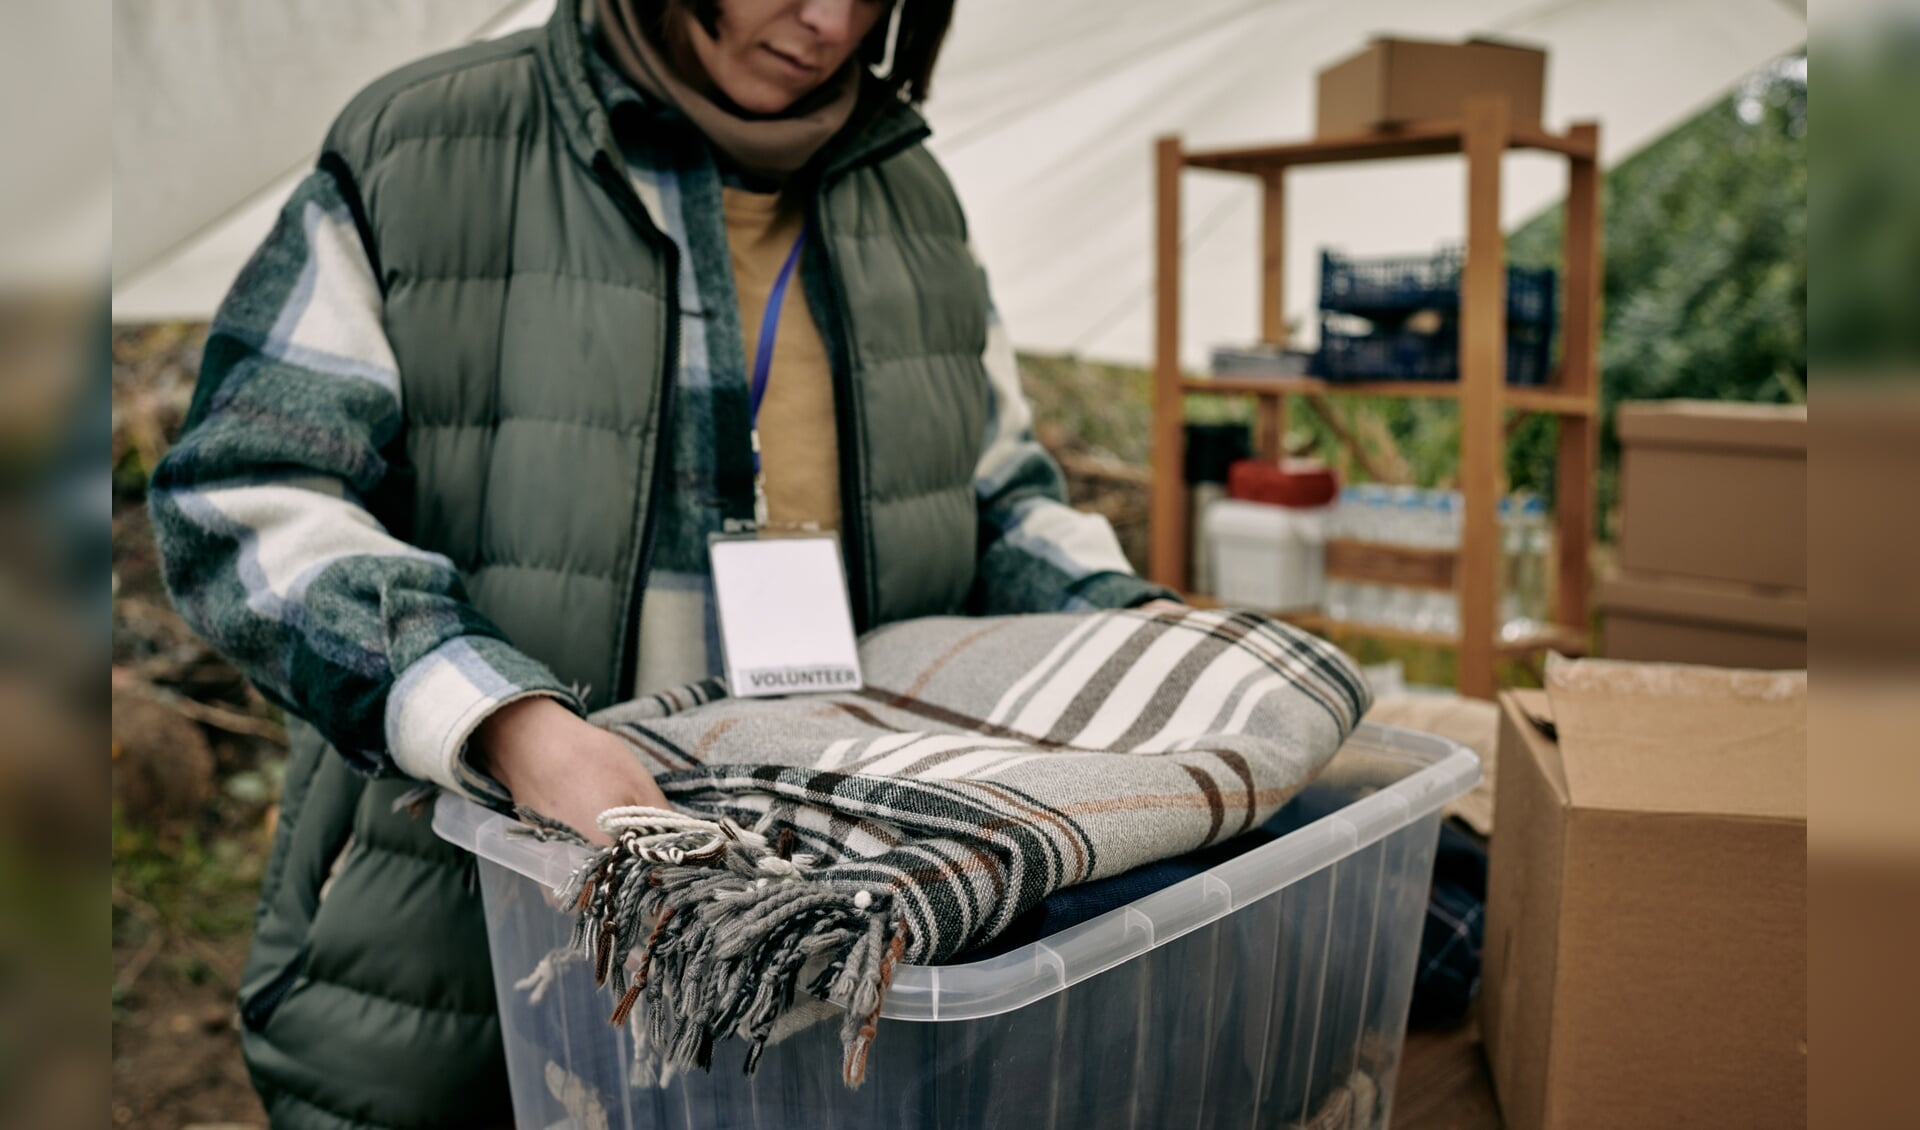 Close-up of female volunteer with badge packing stuff into container while preparing warm blanket for refugees